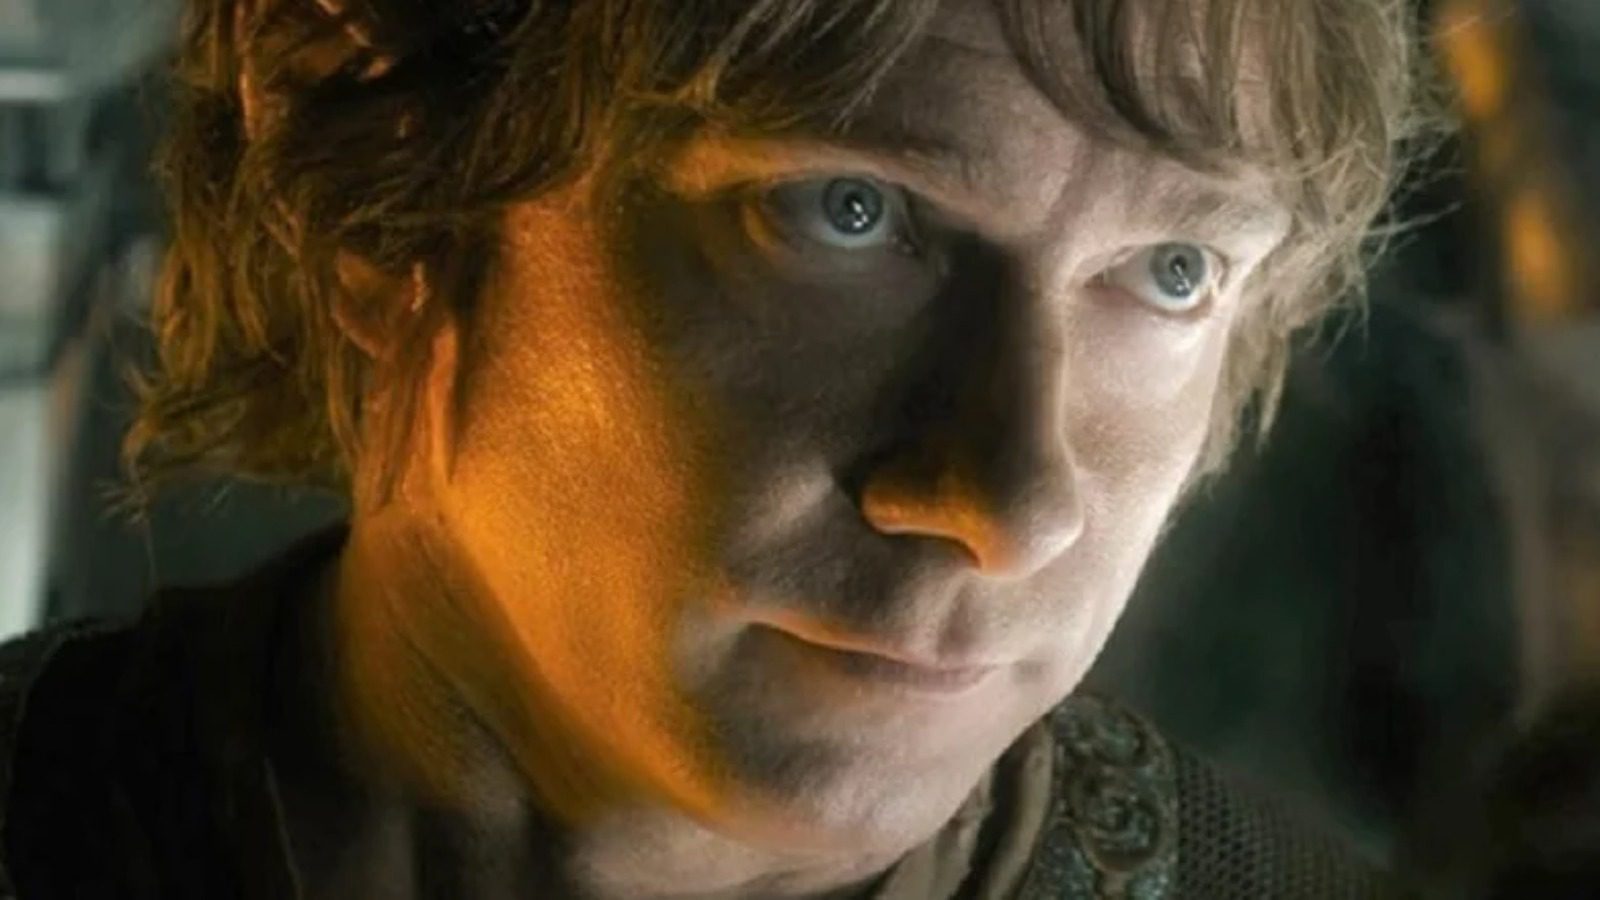 The Ending Of The Hobbit: An Unexpected Journey Explained